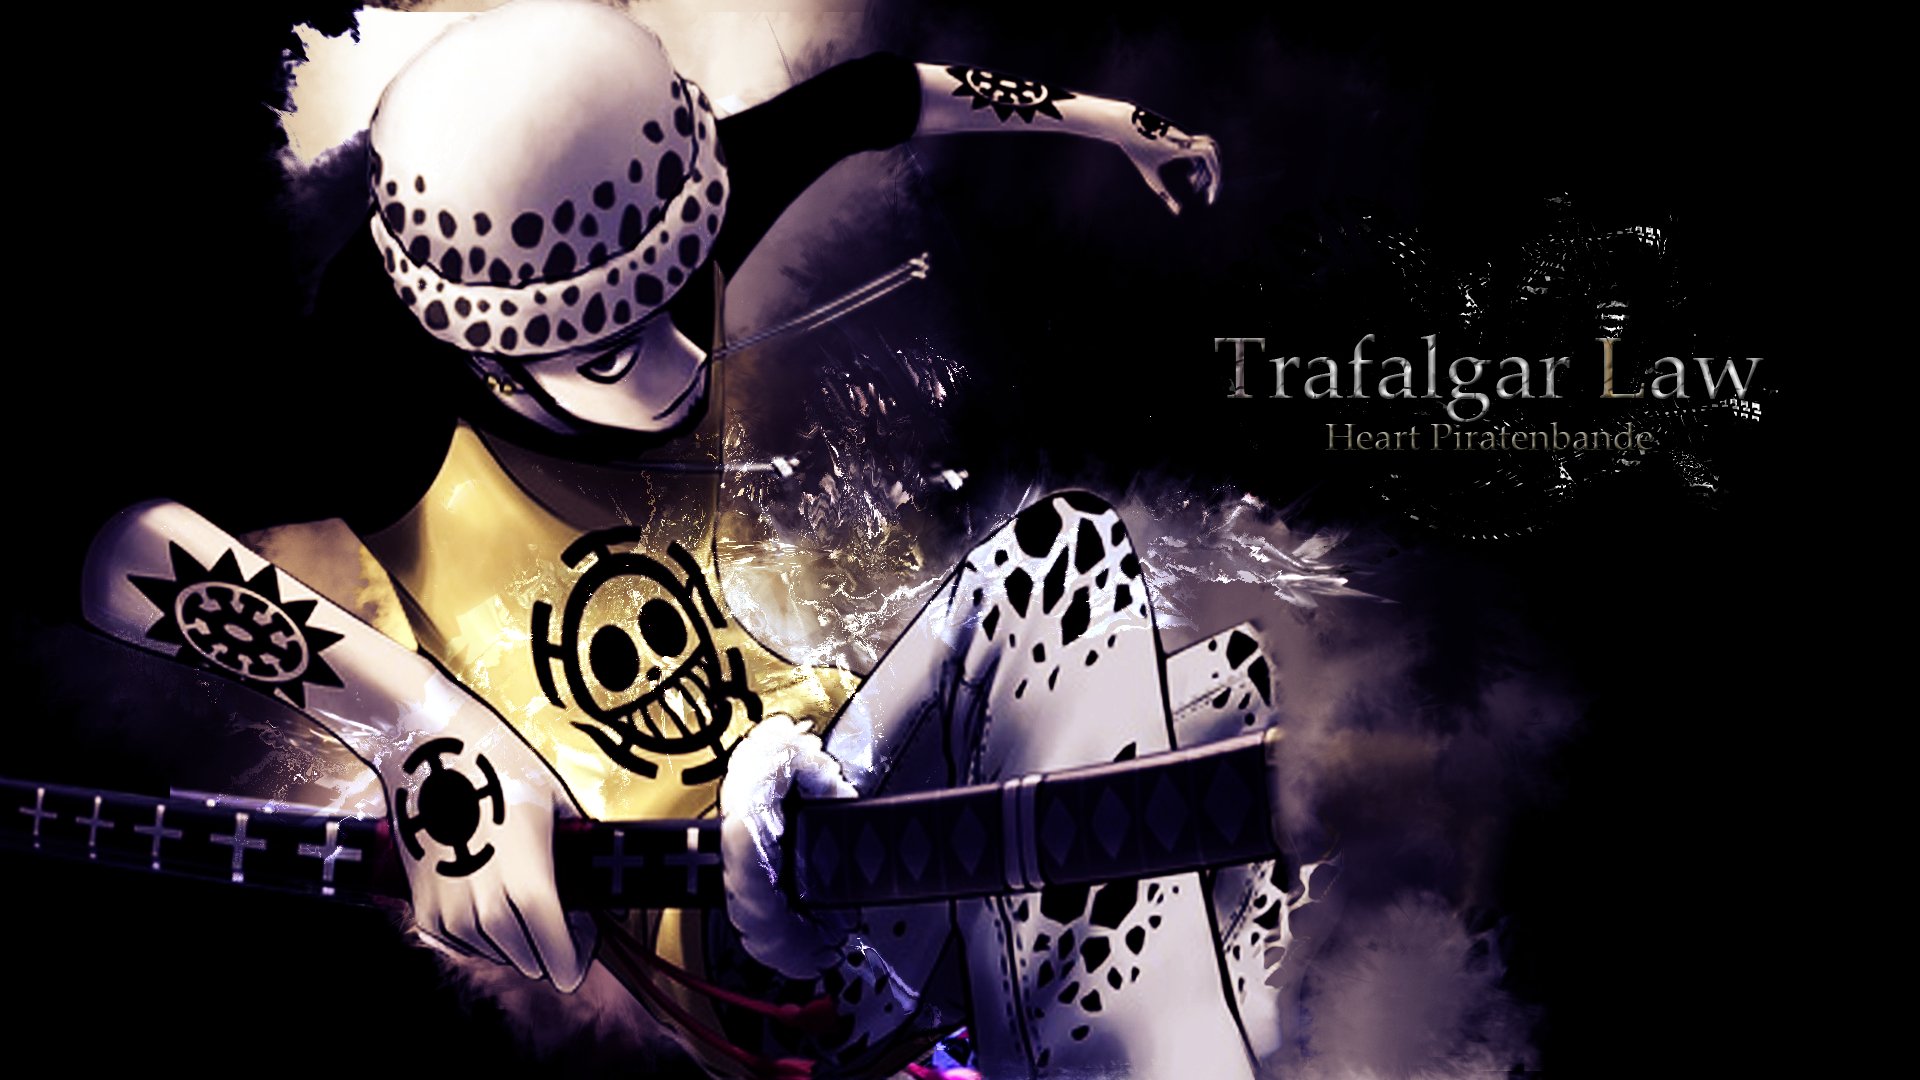 180 Trafalgar Law Hd Wallpapers Background Images